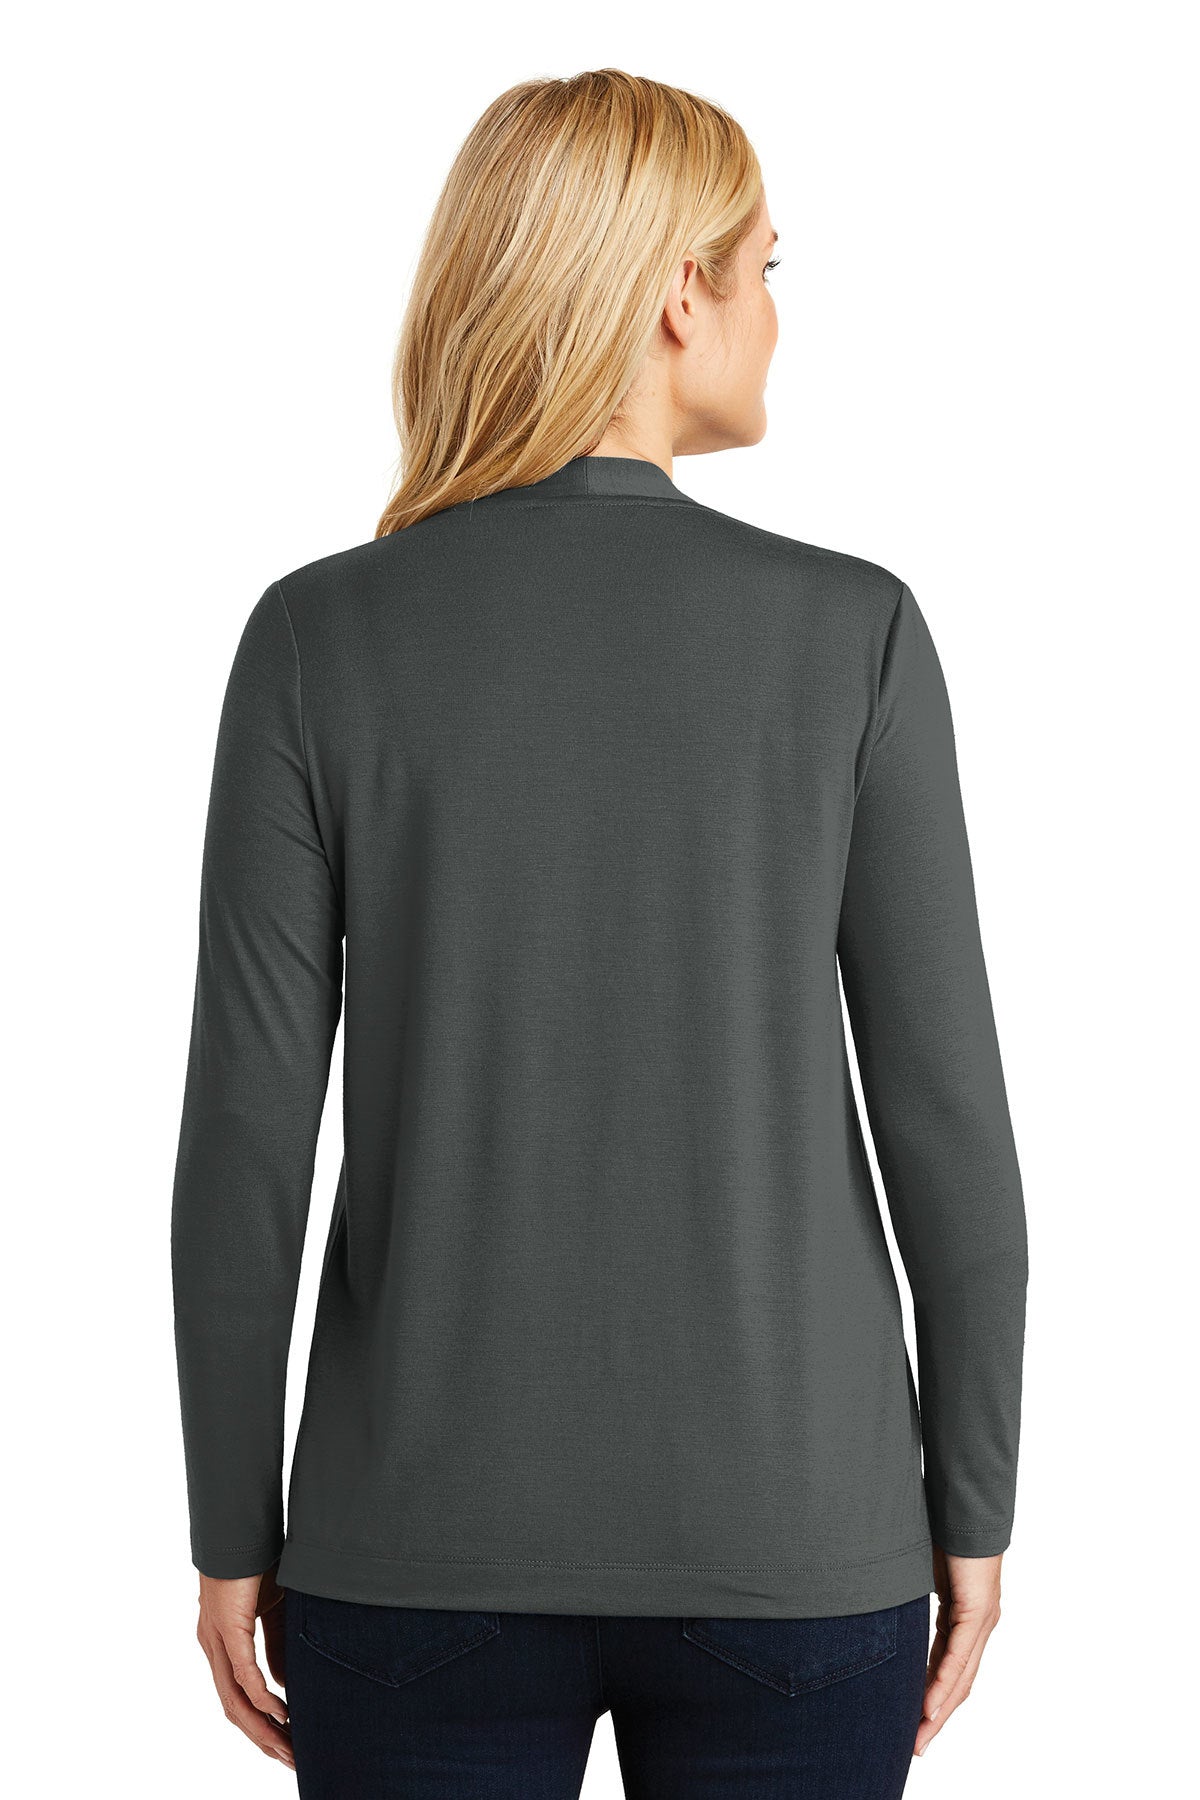 Port Authority Ladies Branded Concept Knit Cardigans, Grey Smoke